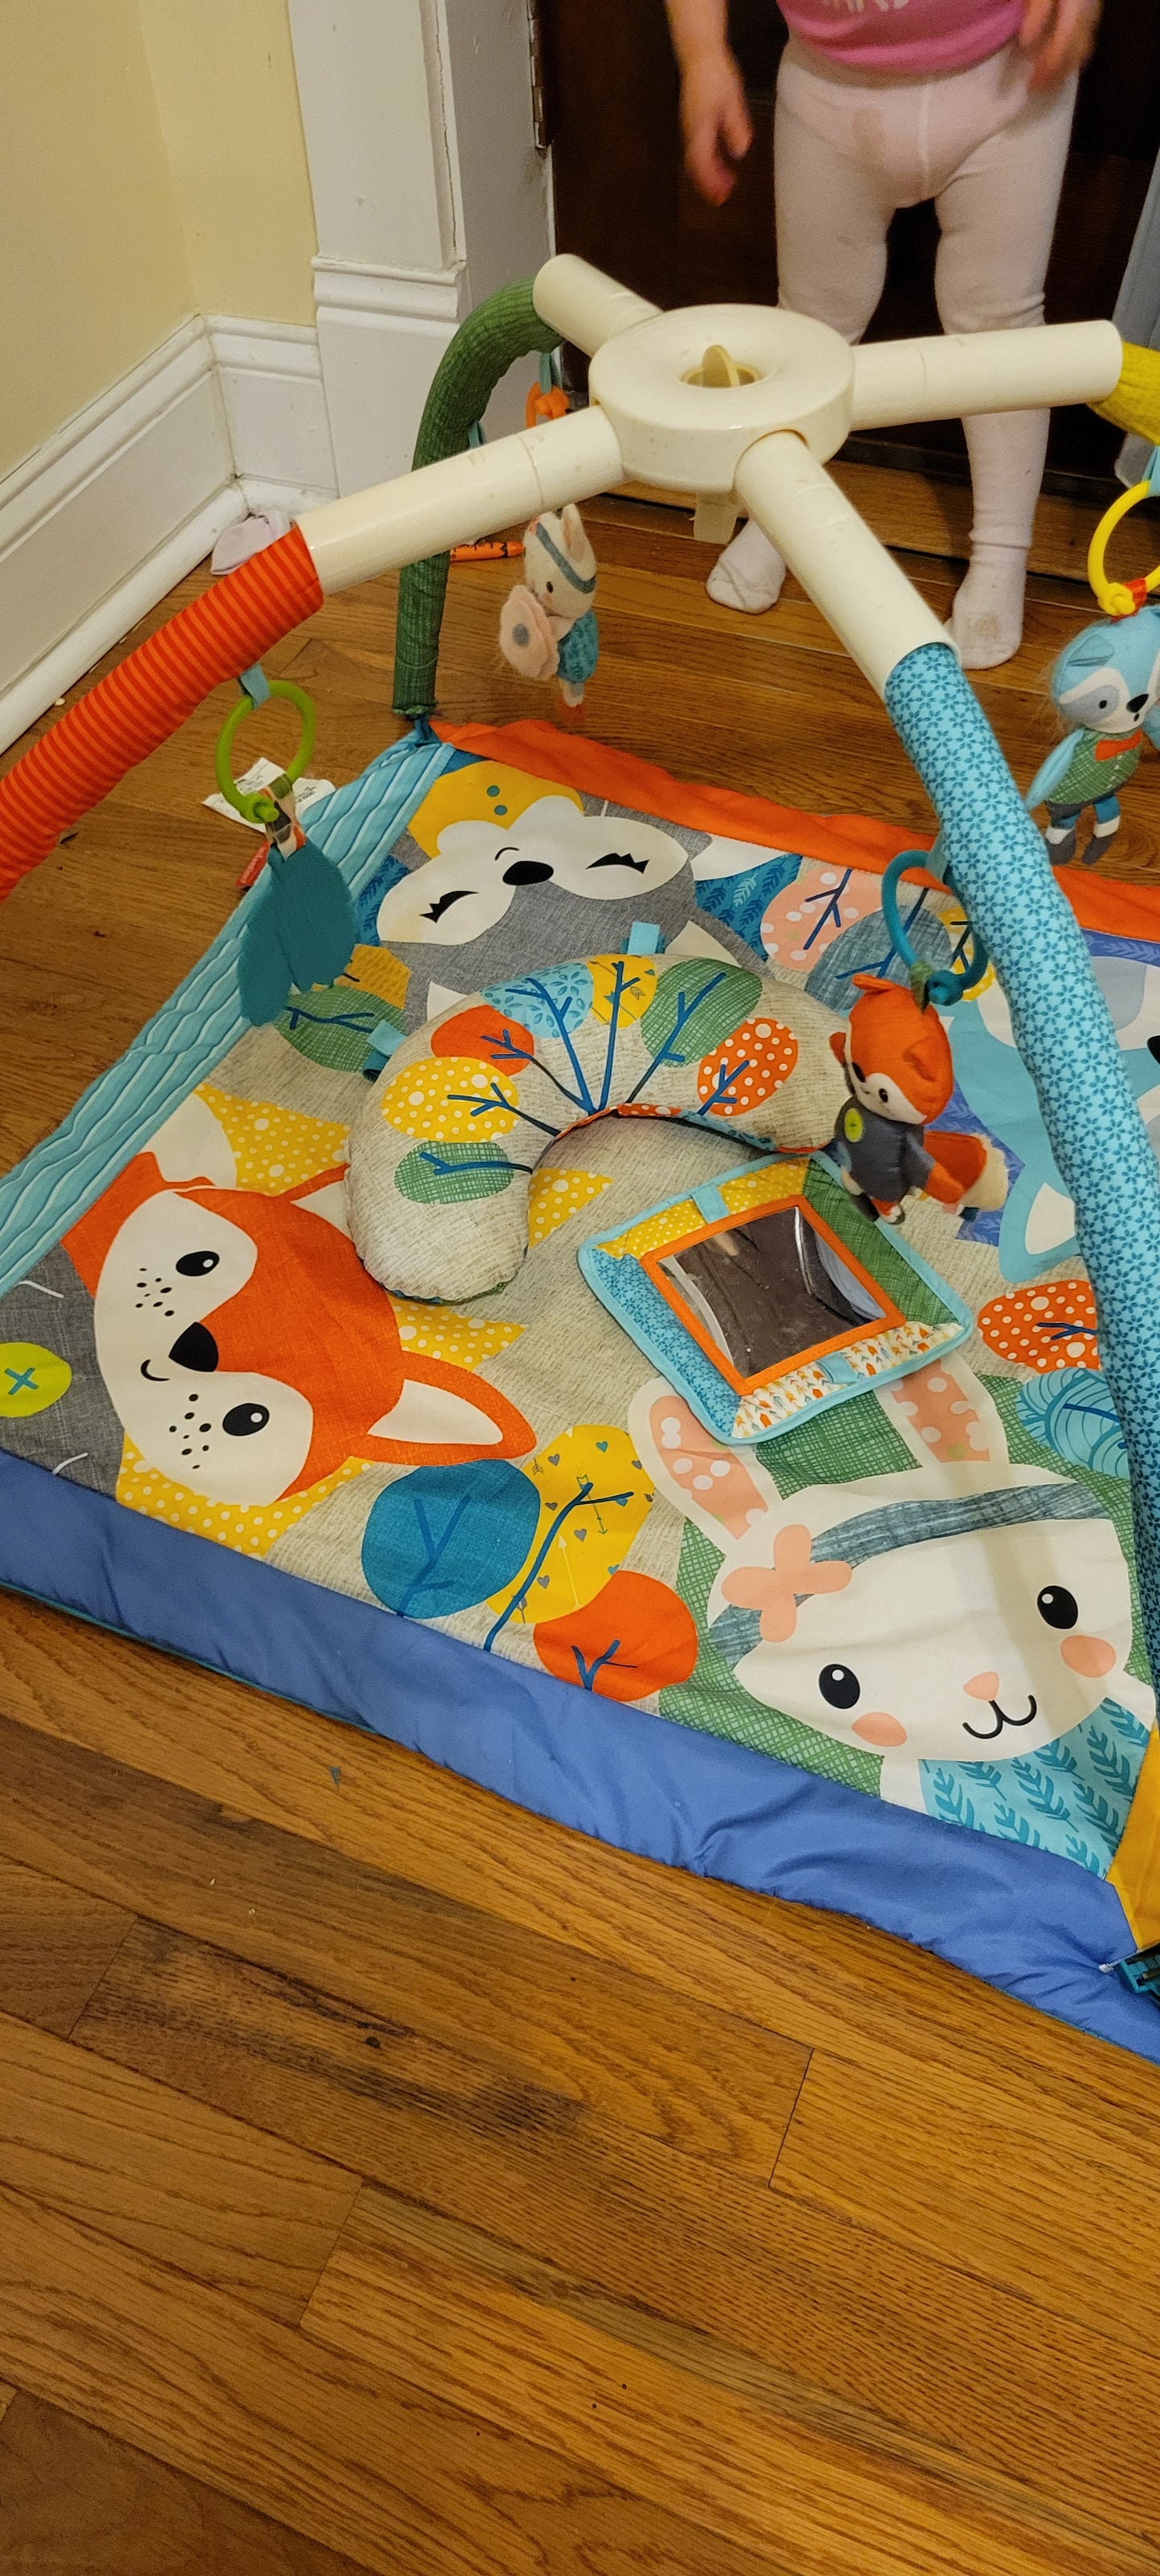 Infantino Floor Mat - all pieces included